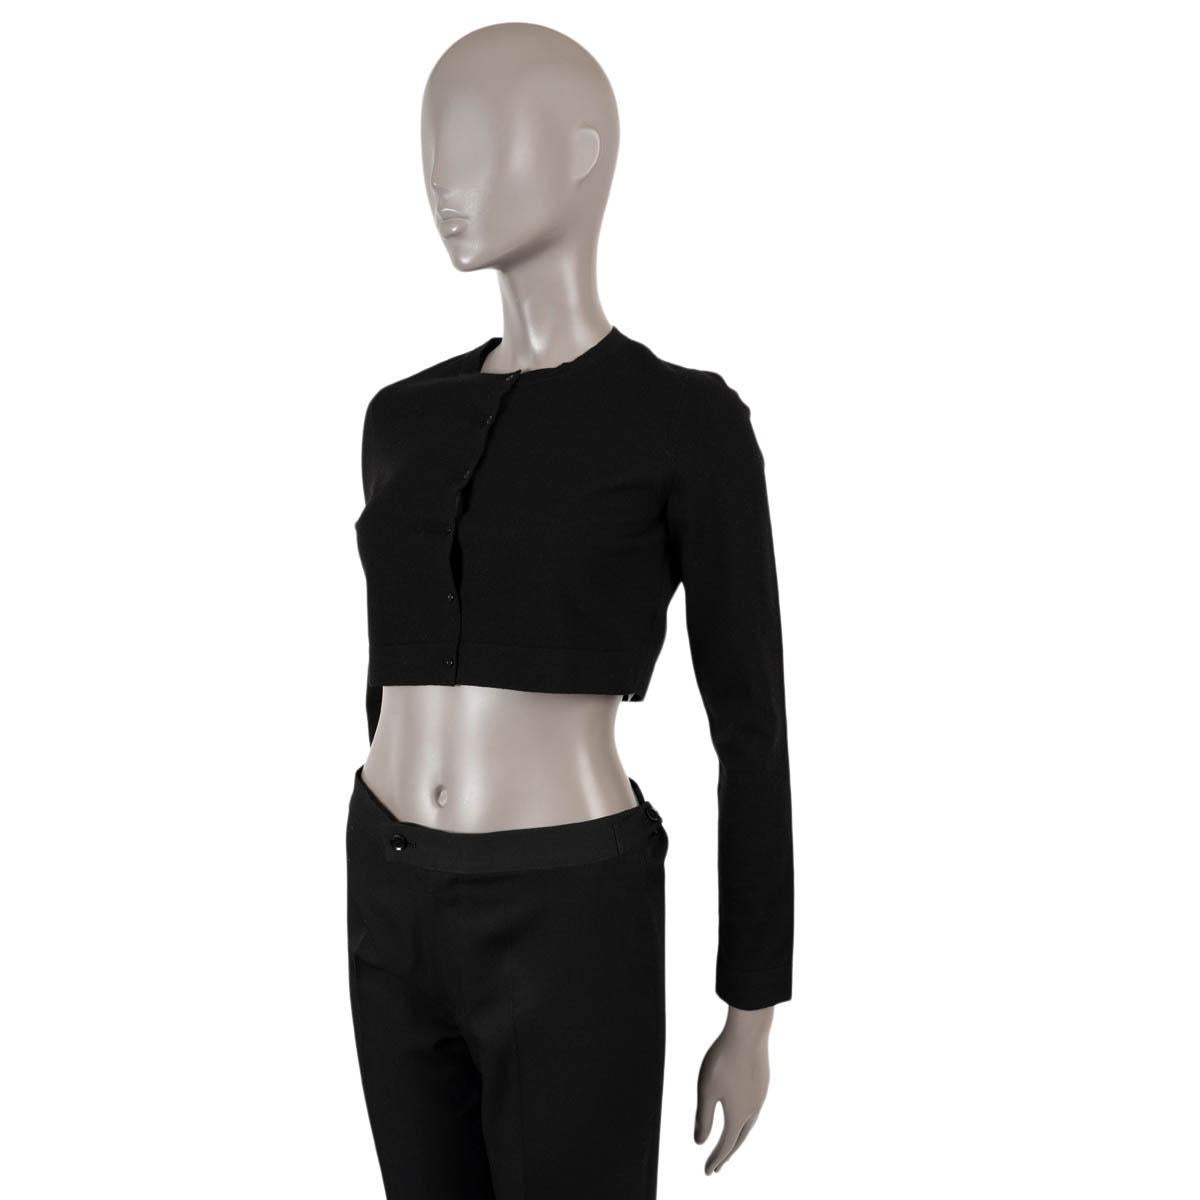 100% authentic Alaïa cropped button cardigan in black wool (87%) and polyester (13%). Has been worn and is in virtually new condition.

Measurements
Model	AA9S02715M879
Tag Size	40
Size	M
Shoulder Width	34cm (13.3in)
Bust From	84cm (32.8in)
Waist